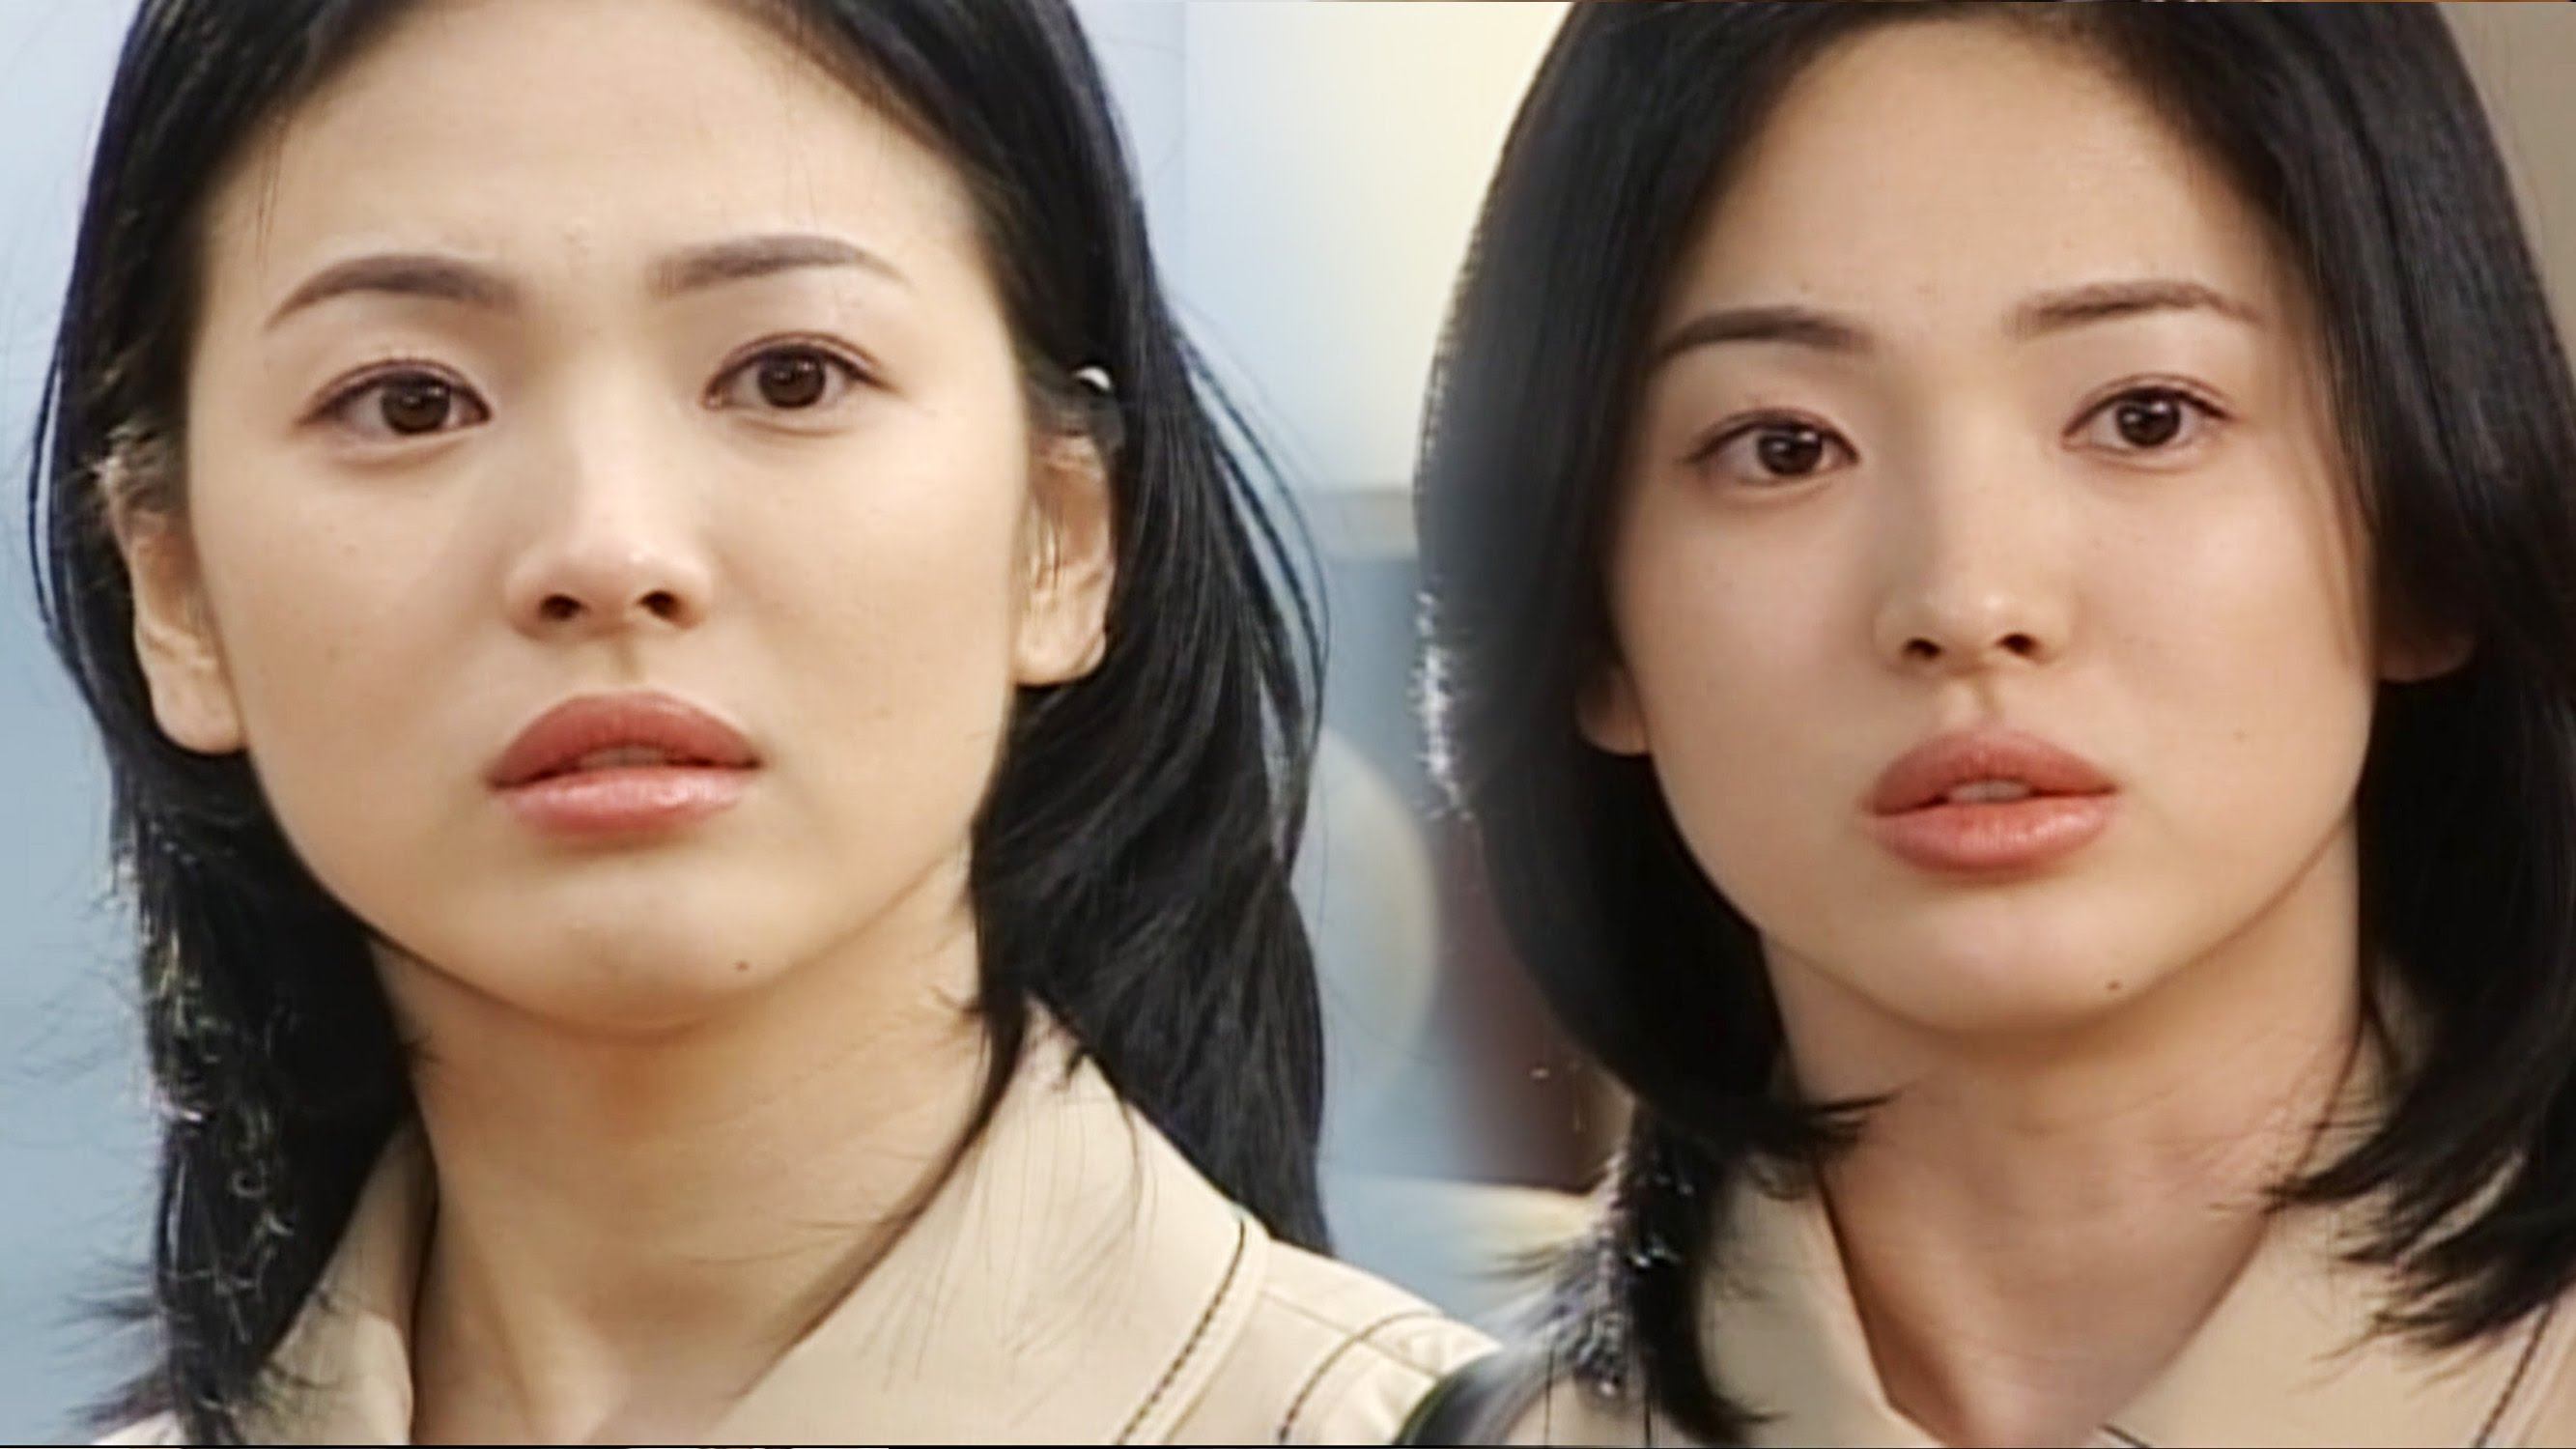 Photos of Song Hye Kyo From 1998-2017 Show She's Only Getting More 